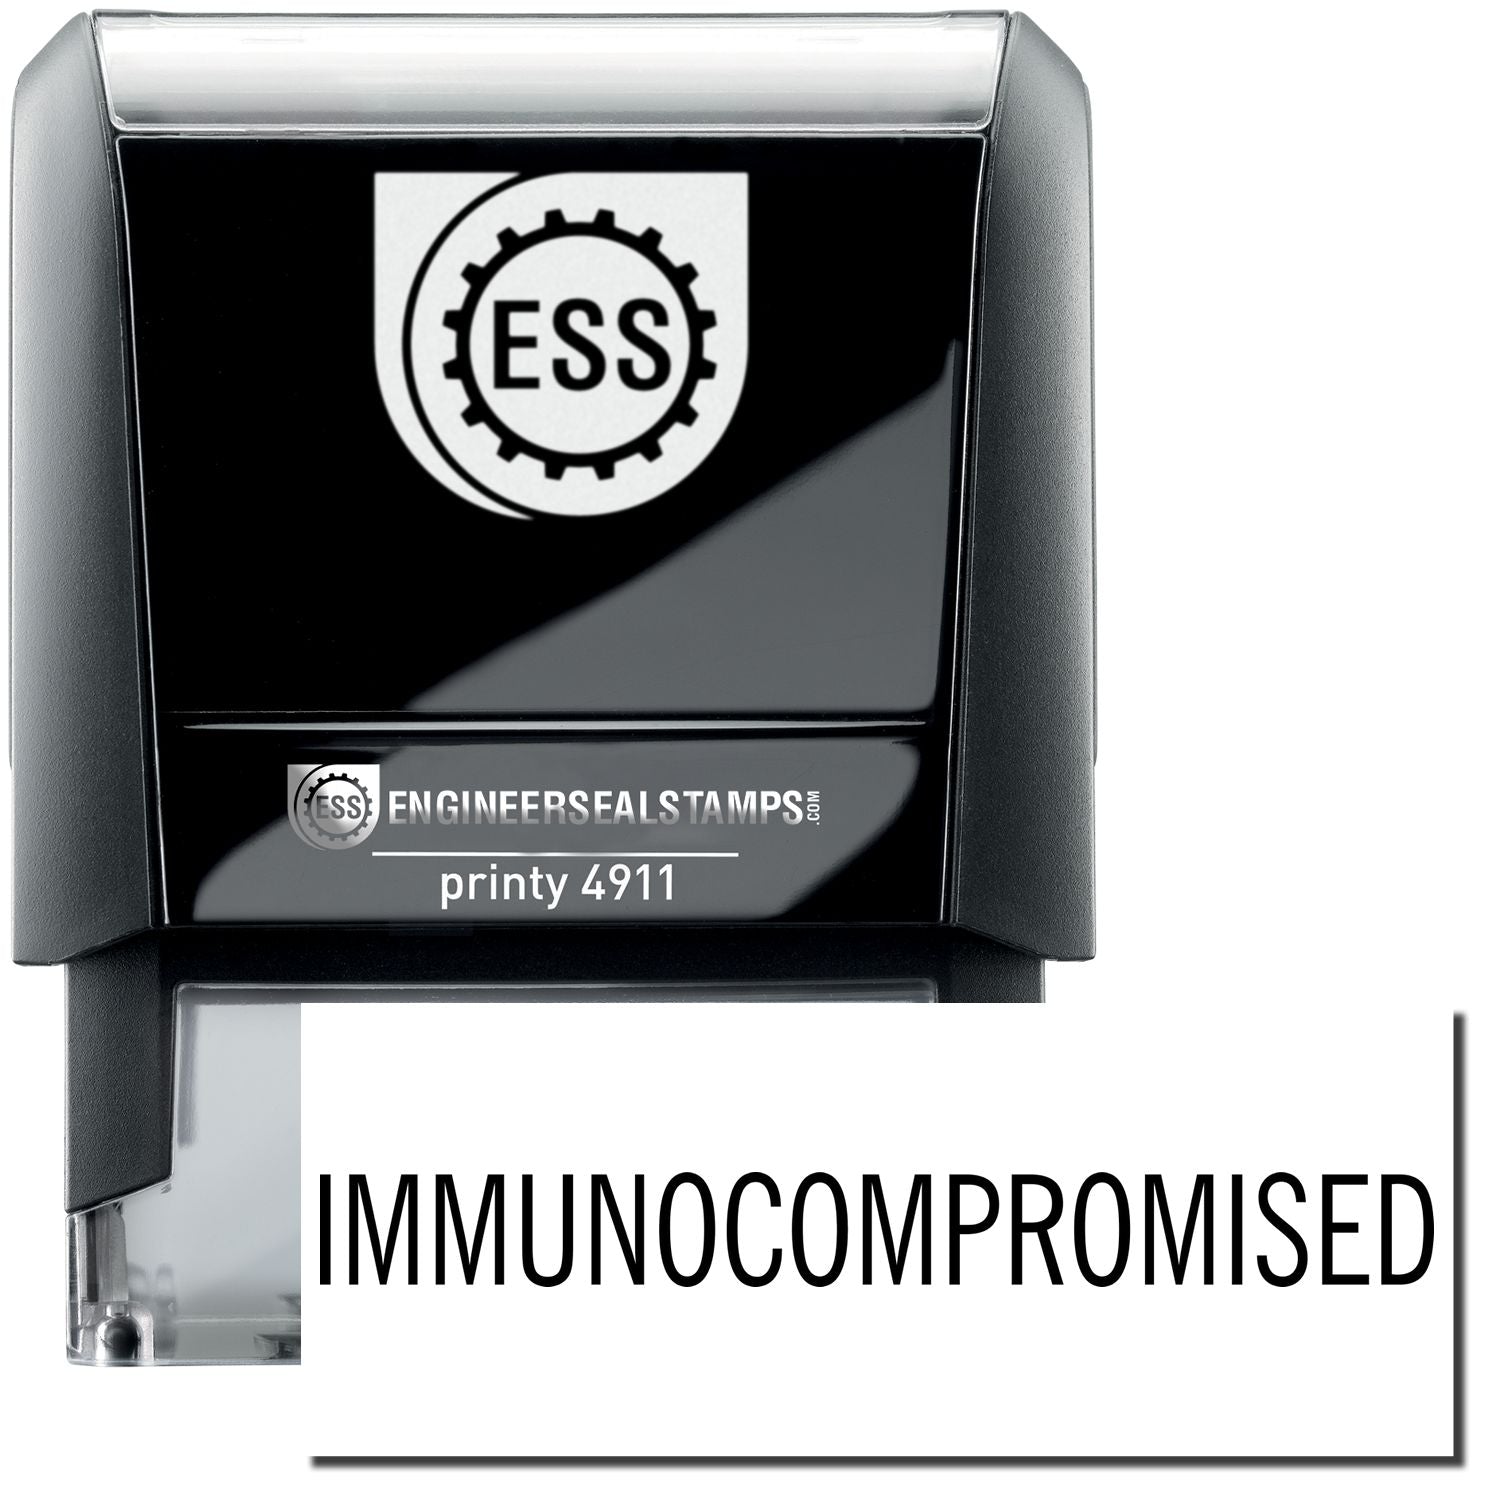 A self-inking stamp with a stamped image showing how the text "IMMUNOCOMPROMISED" is displayed after stamping.